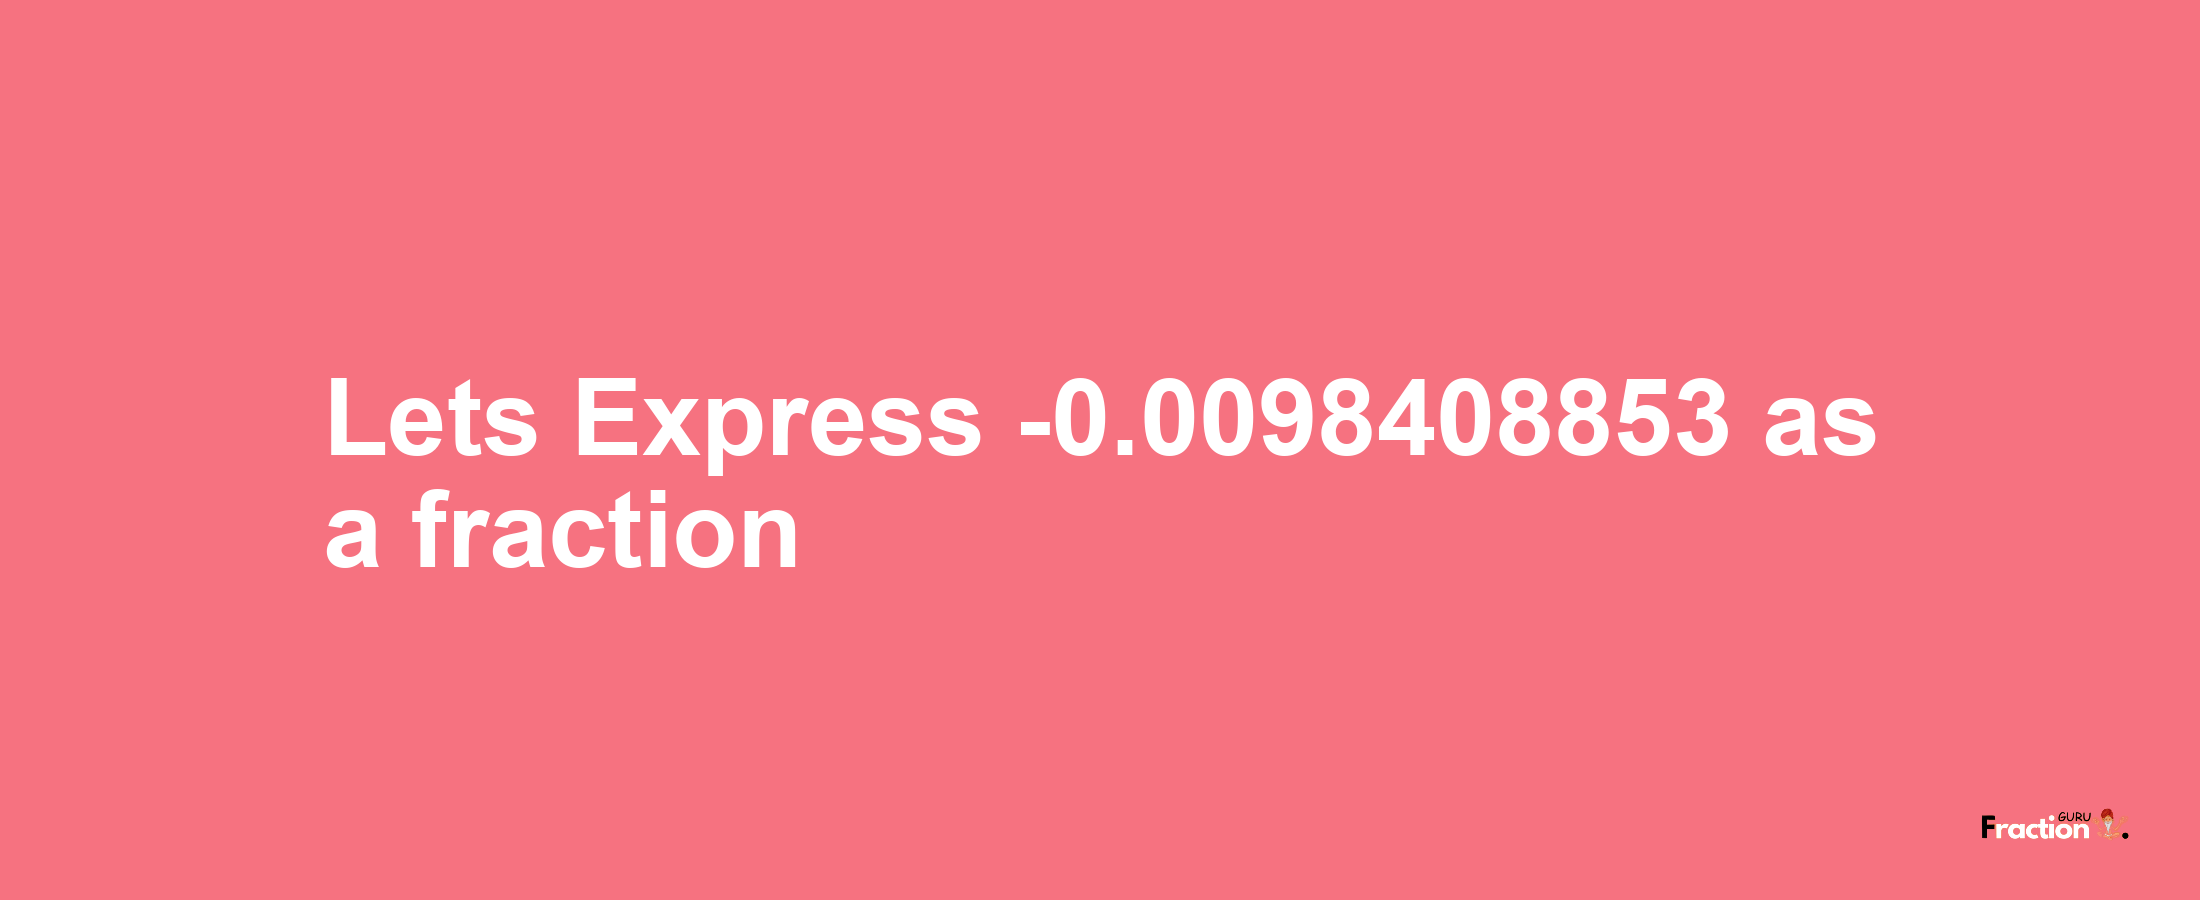 Lets Express -0.0098408853 as afraction